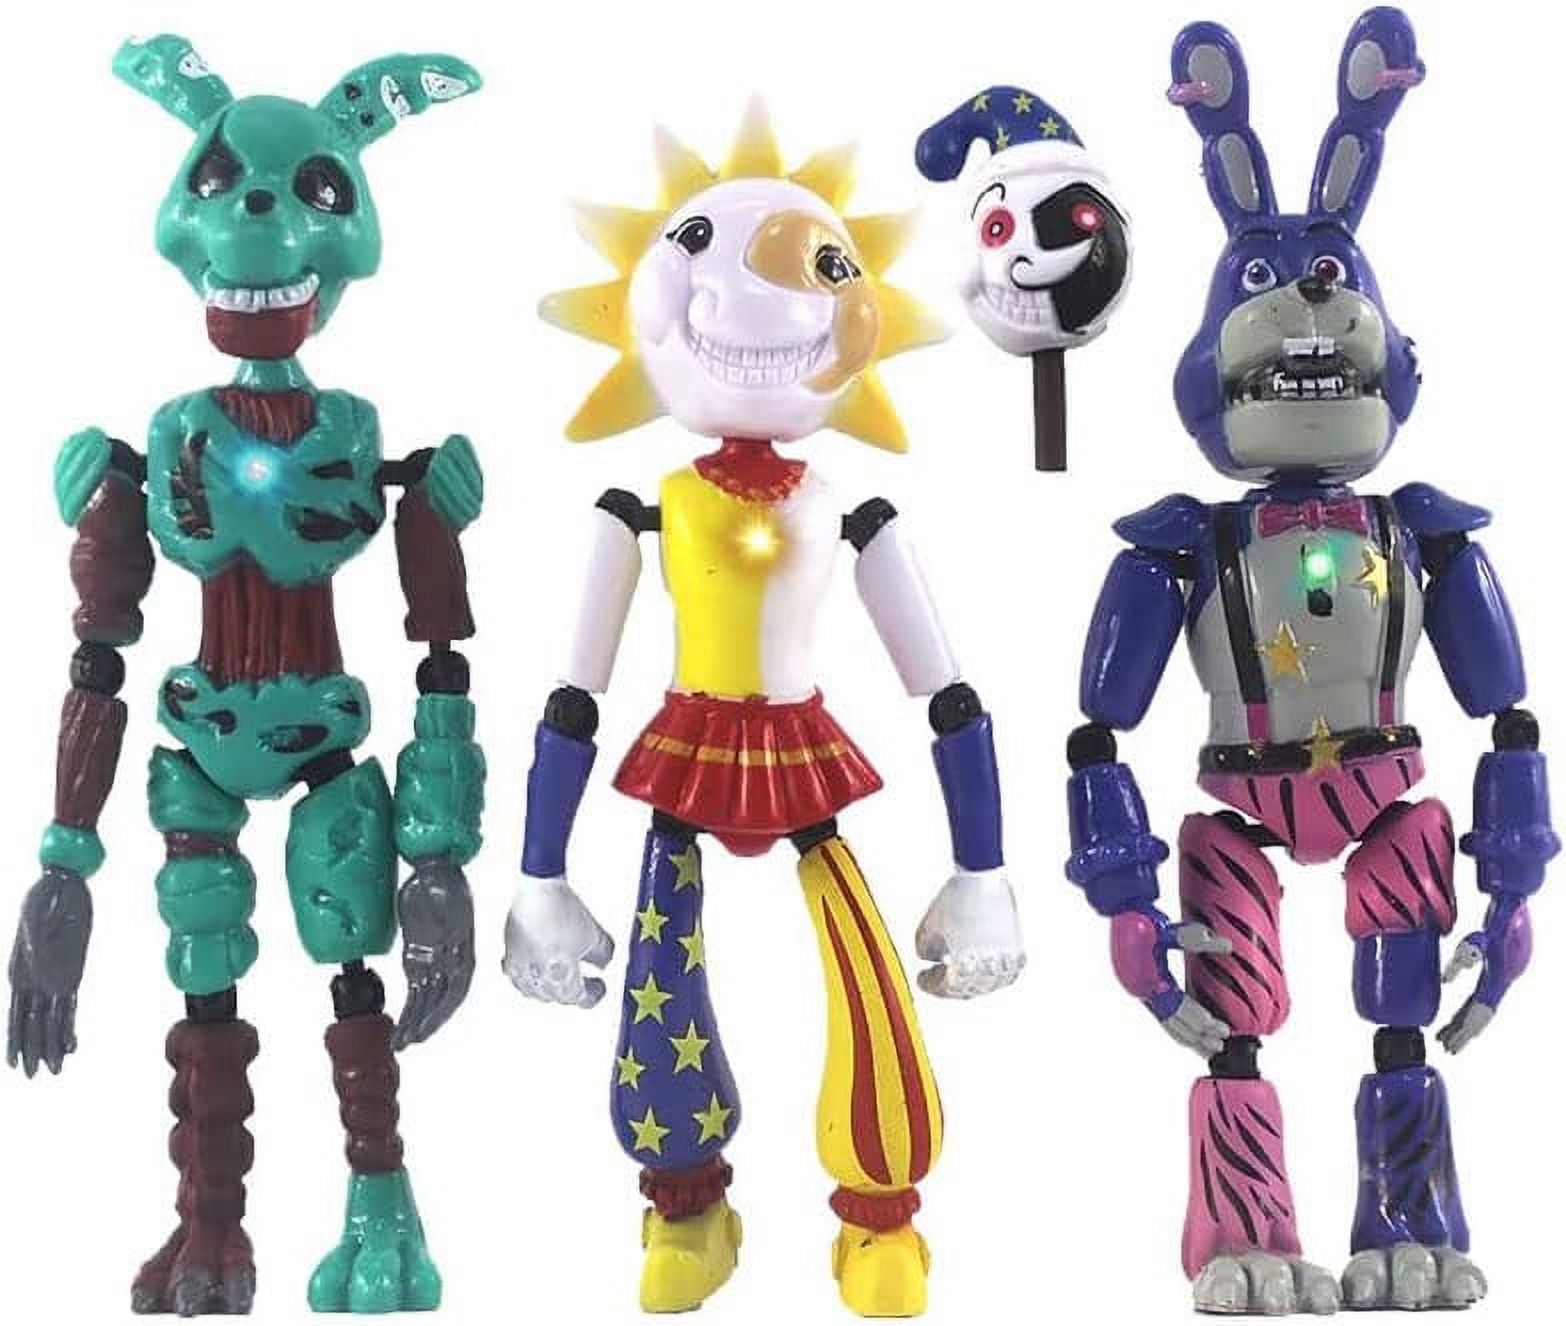 Five Nights at Freddy's Characters in Five Nights at Freddy's